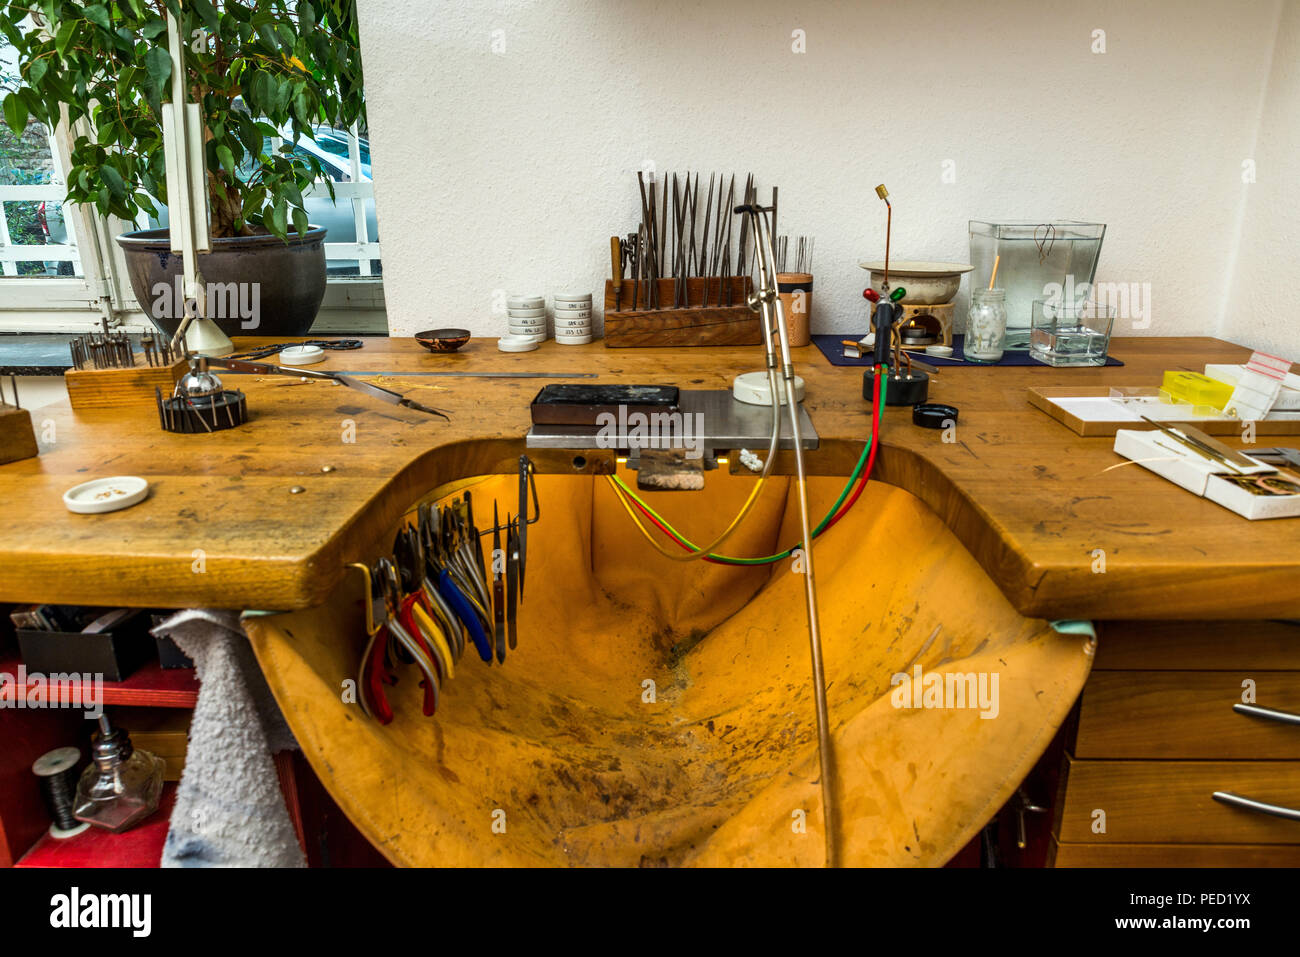 Equipment and tools of a goldsmith with polisher, tongs, pincers on wooden  working desk inside a workshop in the background Stock Photo - Alamy